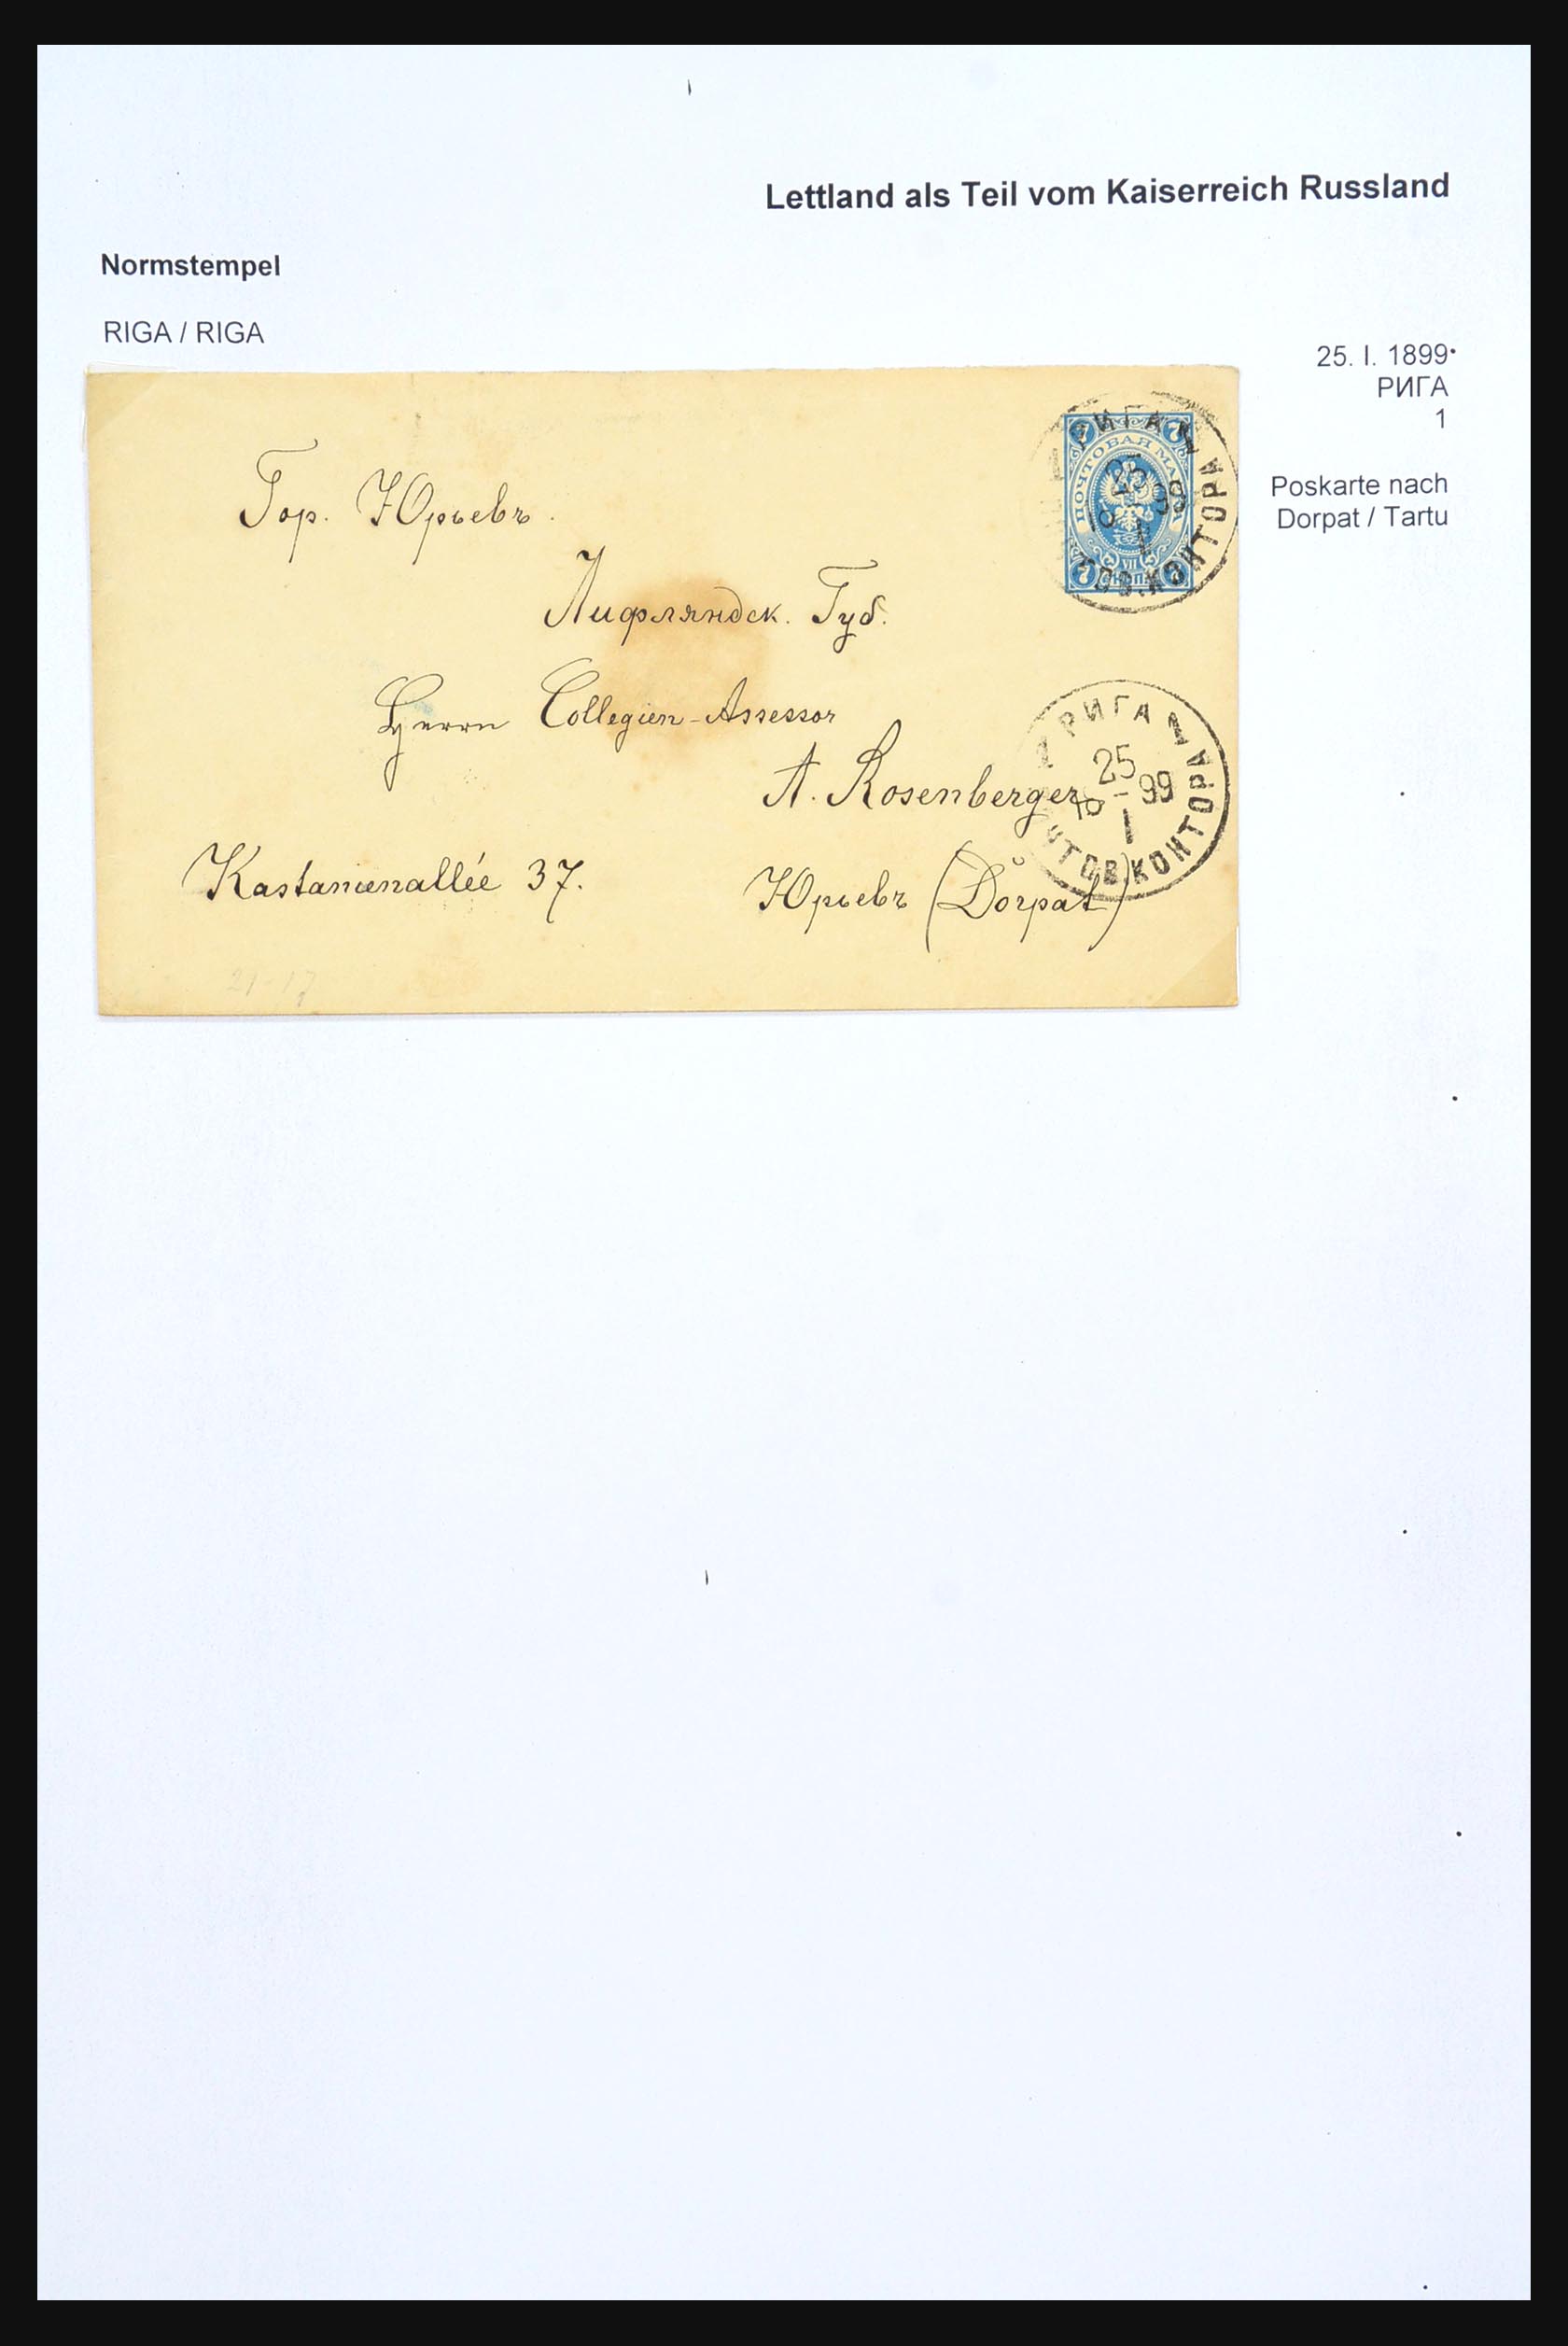 31305 129 - 31305 Latvia as part of Russia 1817-1918.